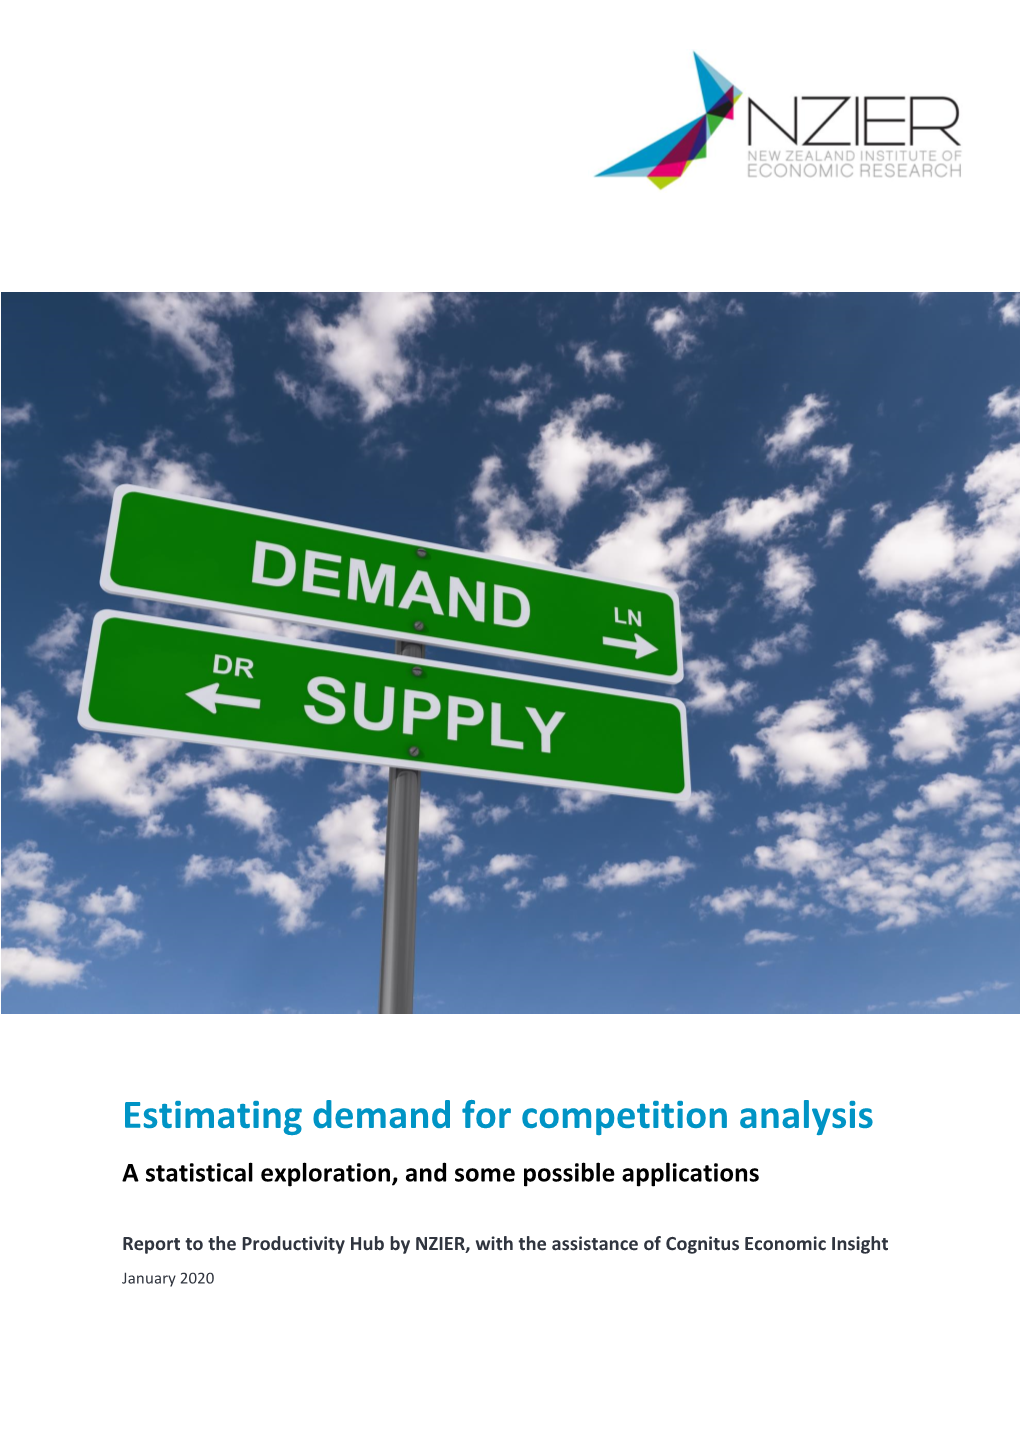 Estimating Demand for Competition Analysis a Statistical Exploration, and Some Possible Applications